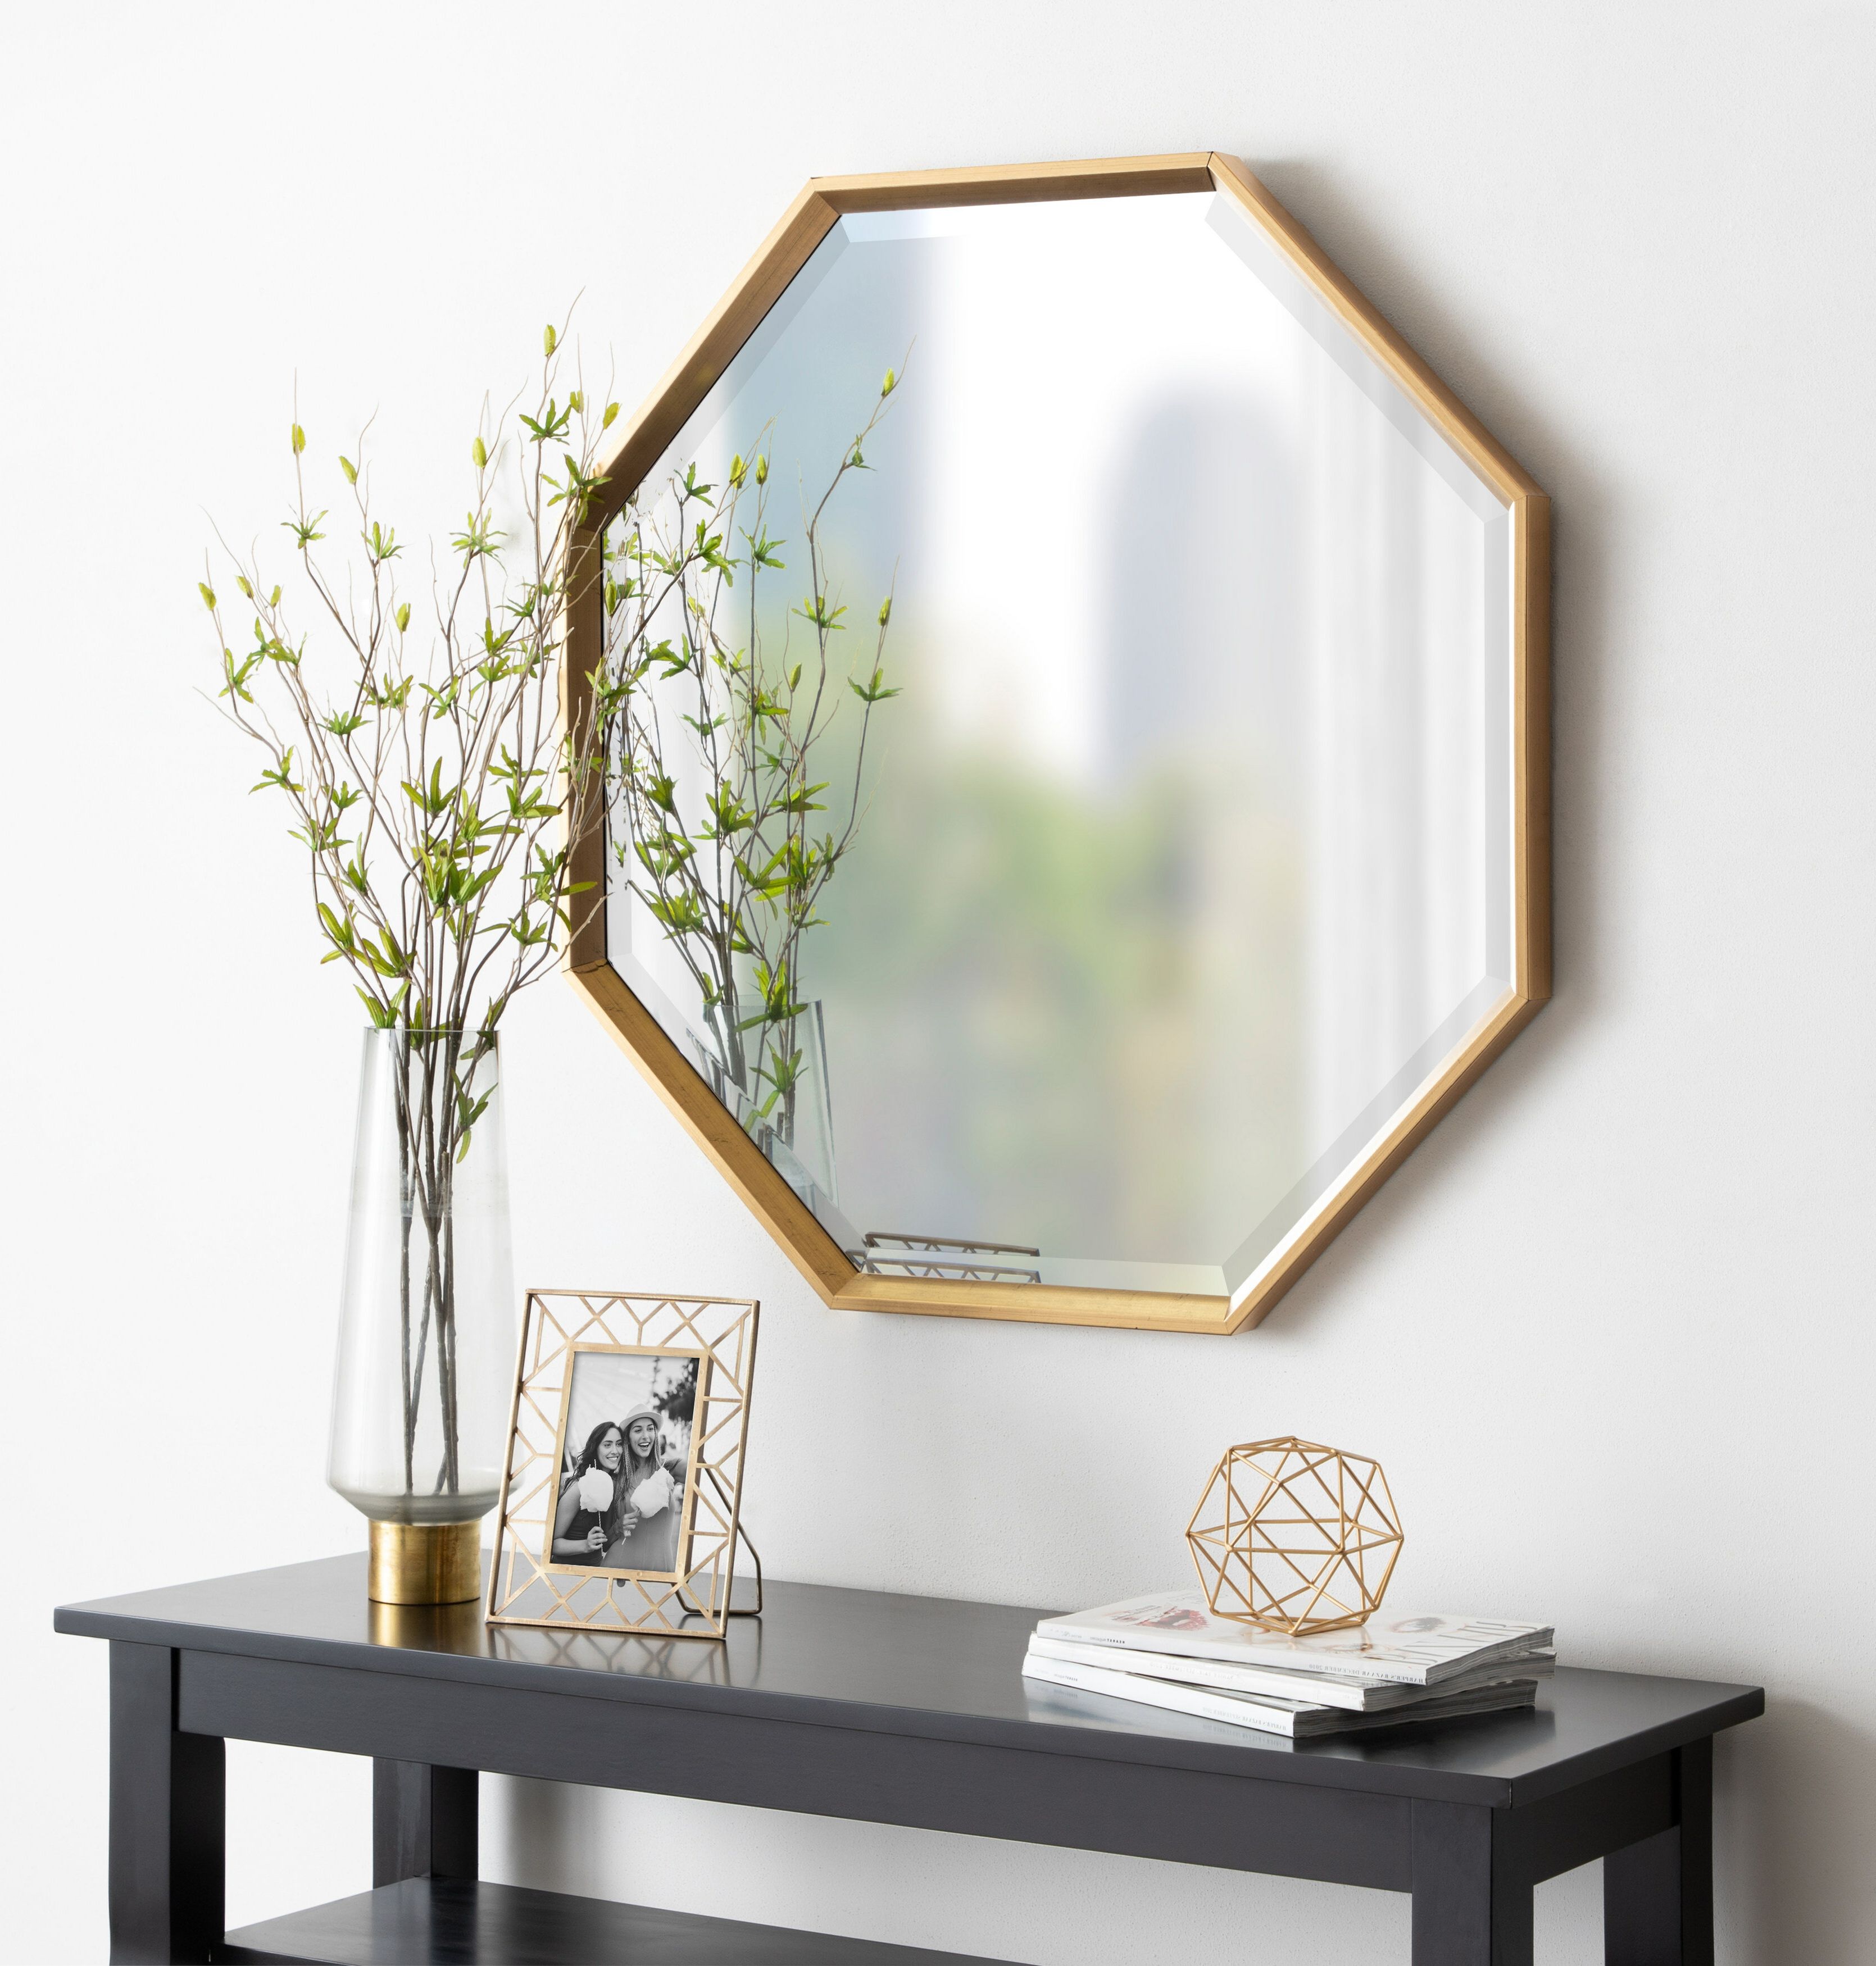 Hartzog Octagon Modern Beveled Accent Mirror Inside Current Shildon Beveled Accent Mirrors (View 13 of 20)